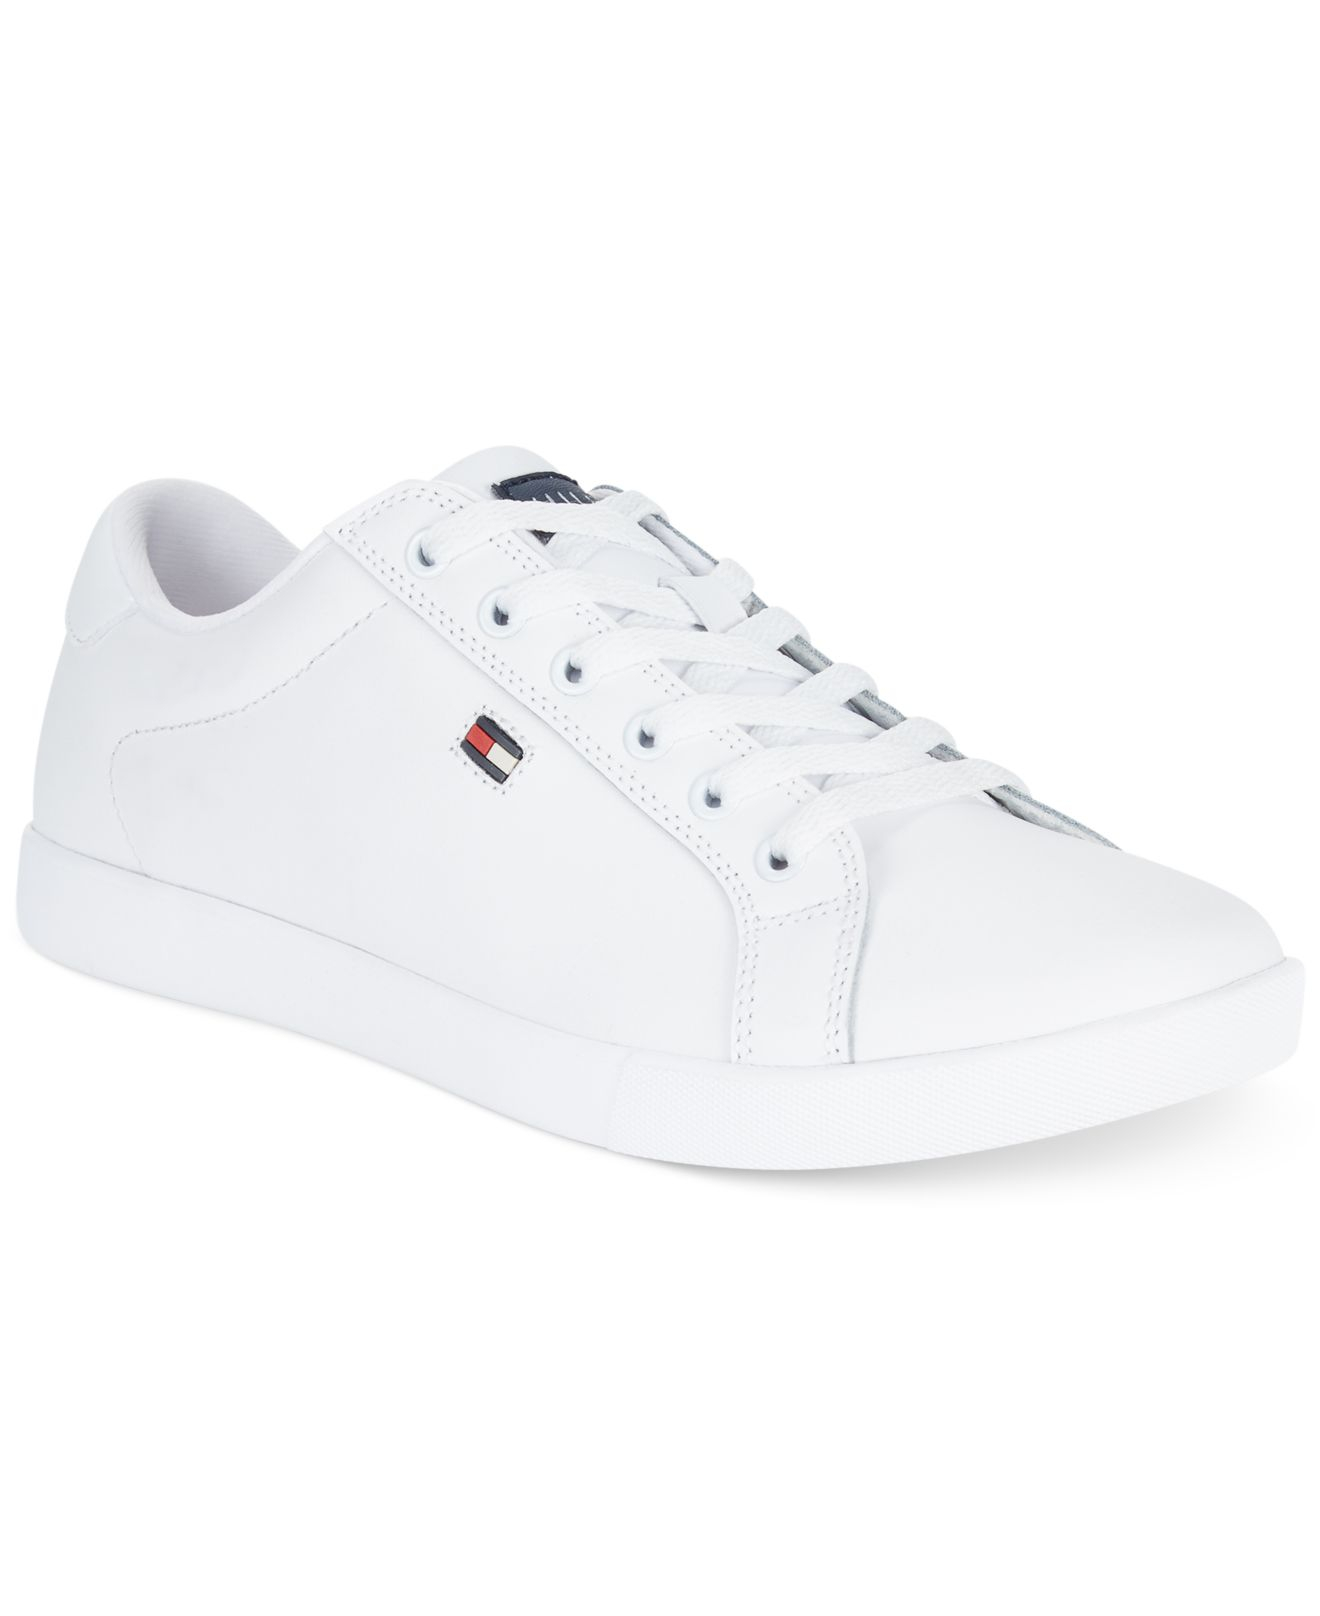 Tommy Hilfiger Synthetic Flag Sneakers in White for Men - Lyst